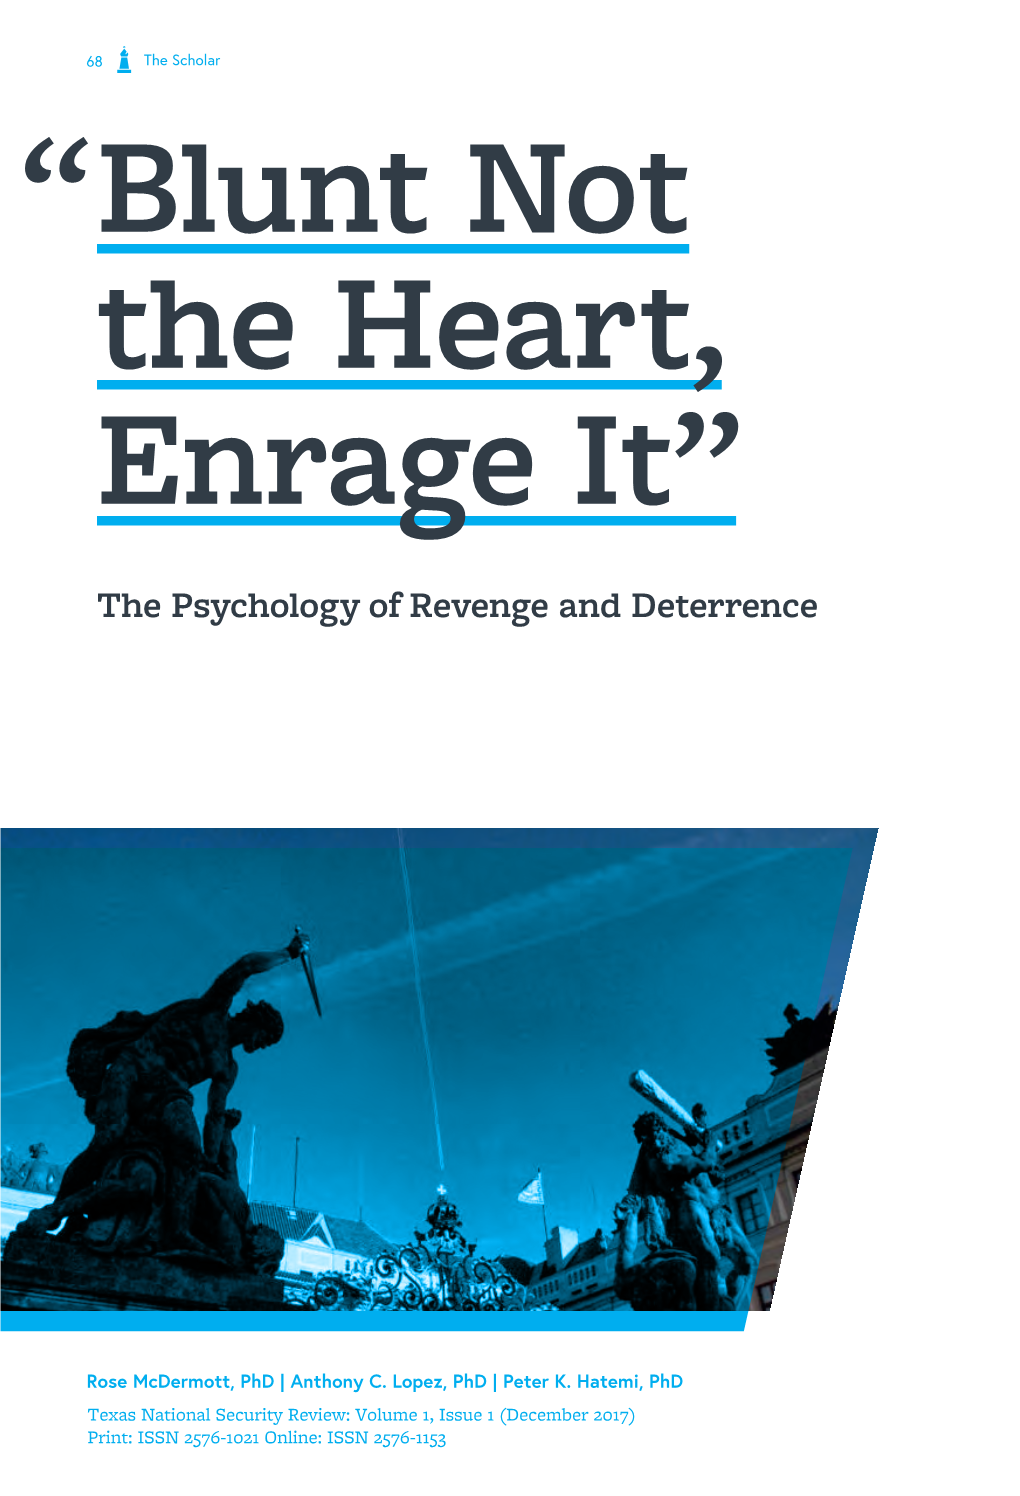 The Psychology of Revenge and Deterrence